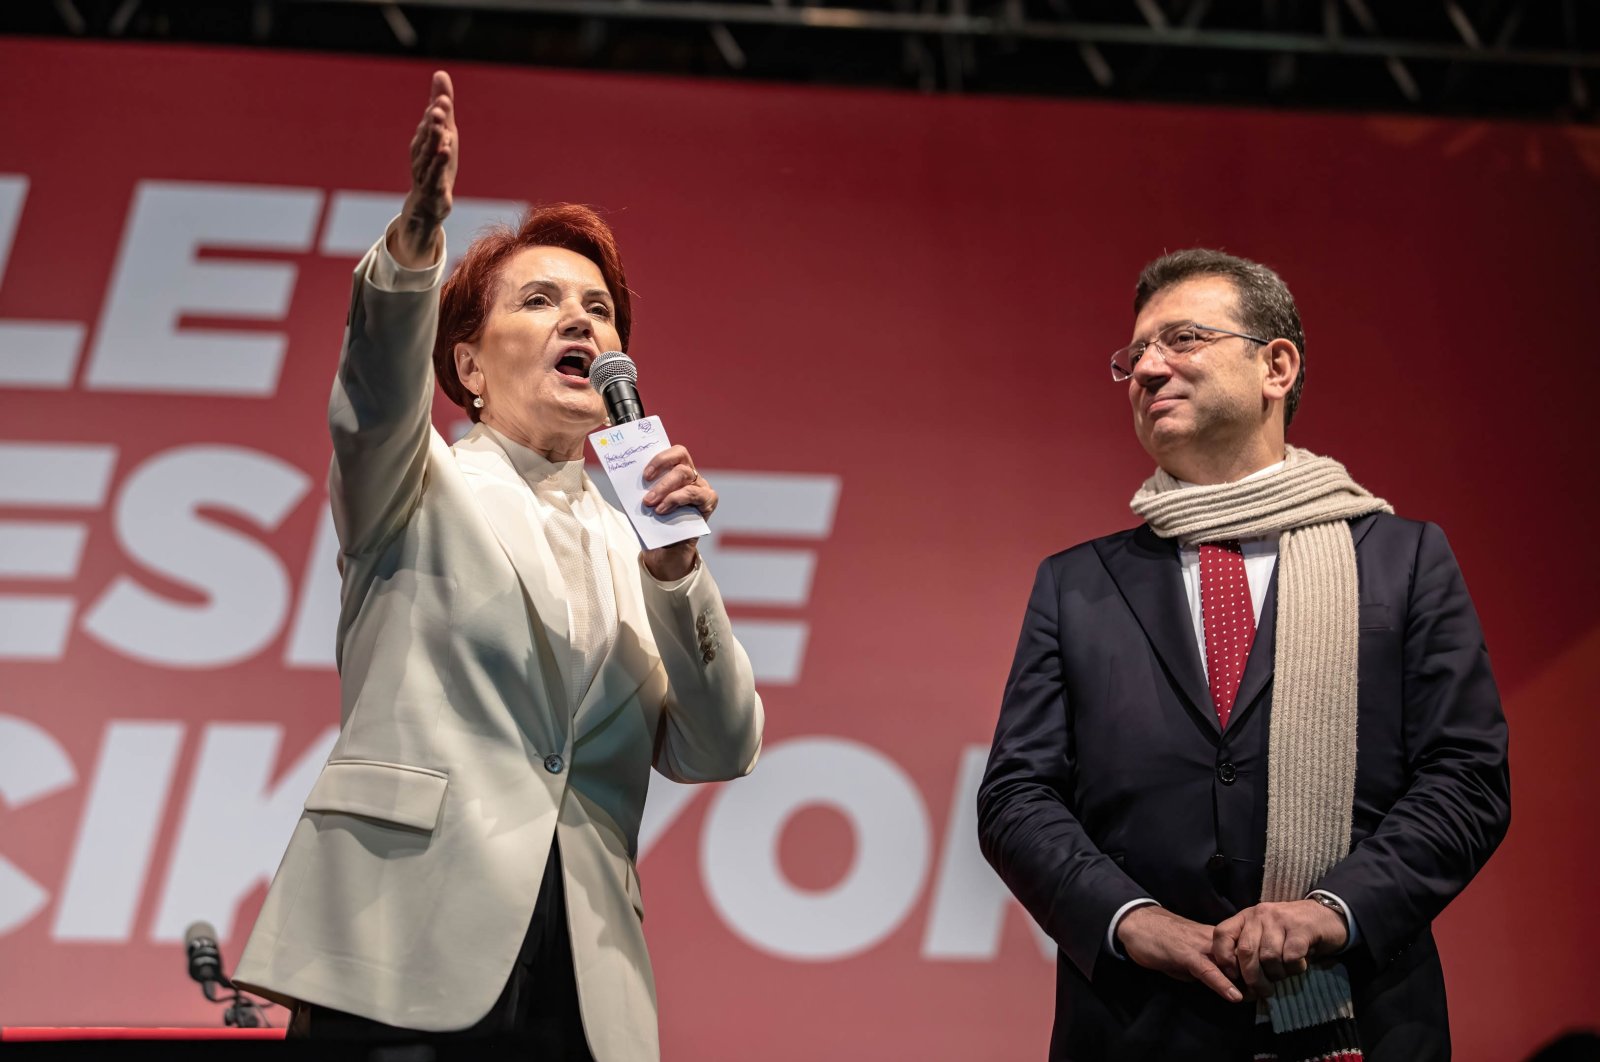 Good Party (IP) Chairperson Meral Akşener (L) and Istanbul Mayor Ekrem Imamoğlu deliver a speech at a rally held in front of the Istanbul Metropolitan Municipality building, Istanbul, Türkiye, Dec. 15, 2022. (Getty Images Photo)